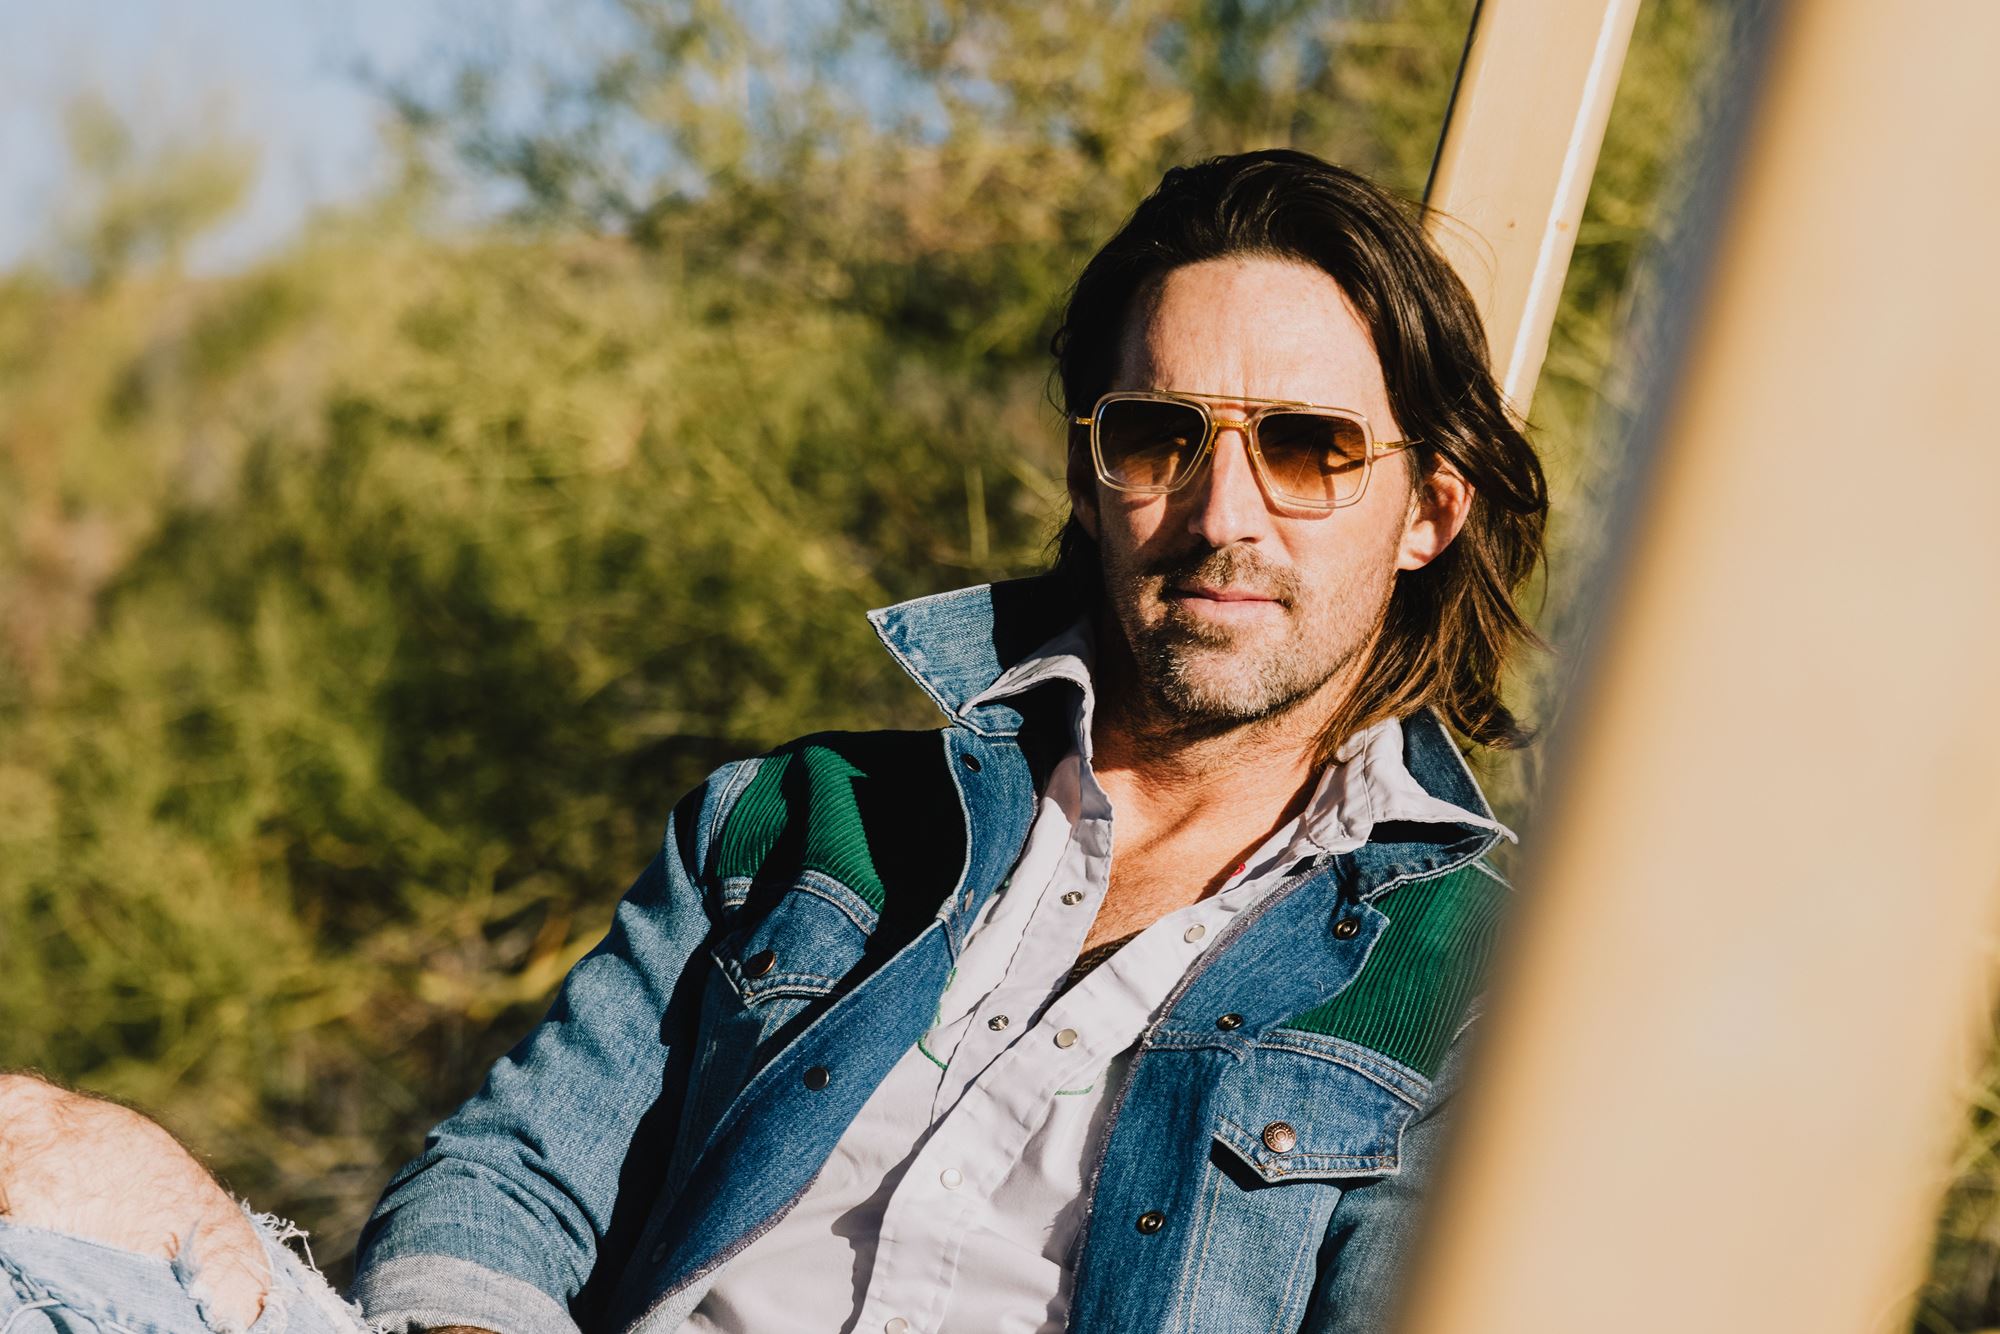 PRCA Rodeo w/ Jake Owen <br> Friday, Feb. 10, 2022 at 7 PM